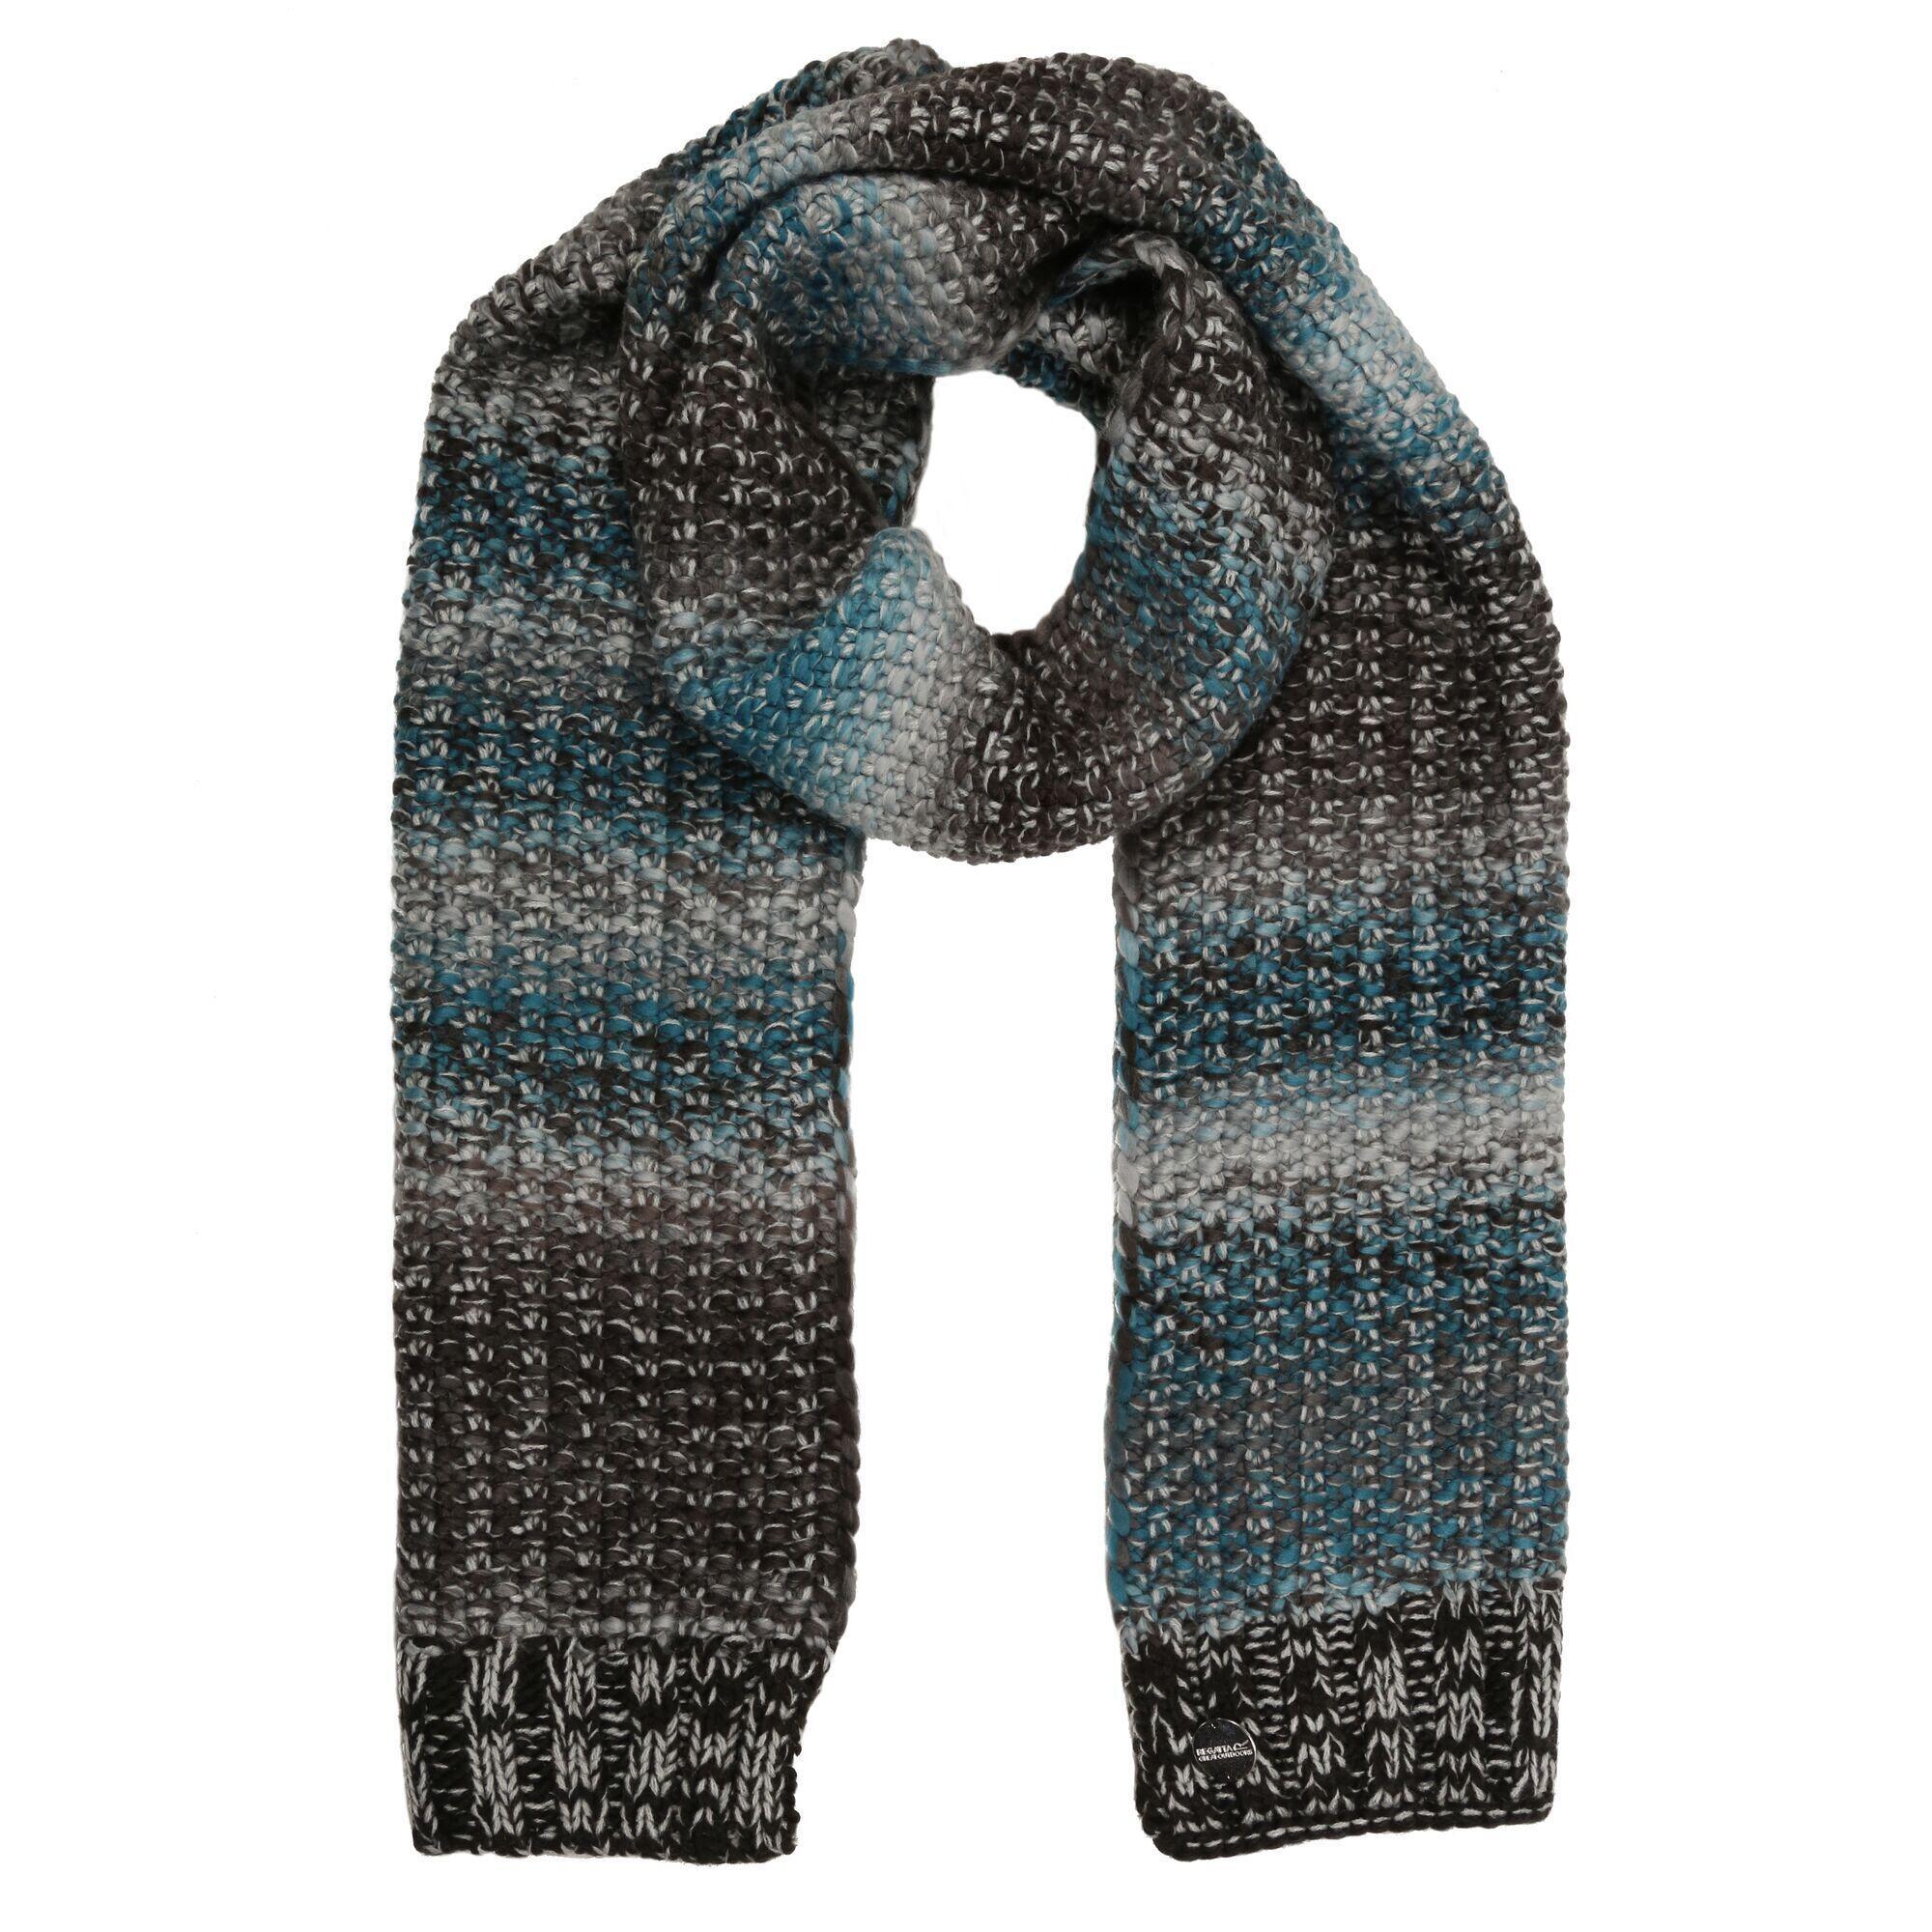 Womens/Ladies Frosty Knitted Scarf (Teal/Black) 1/4